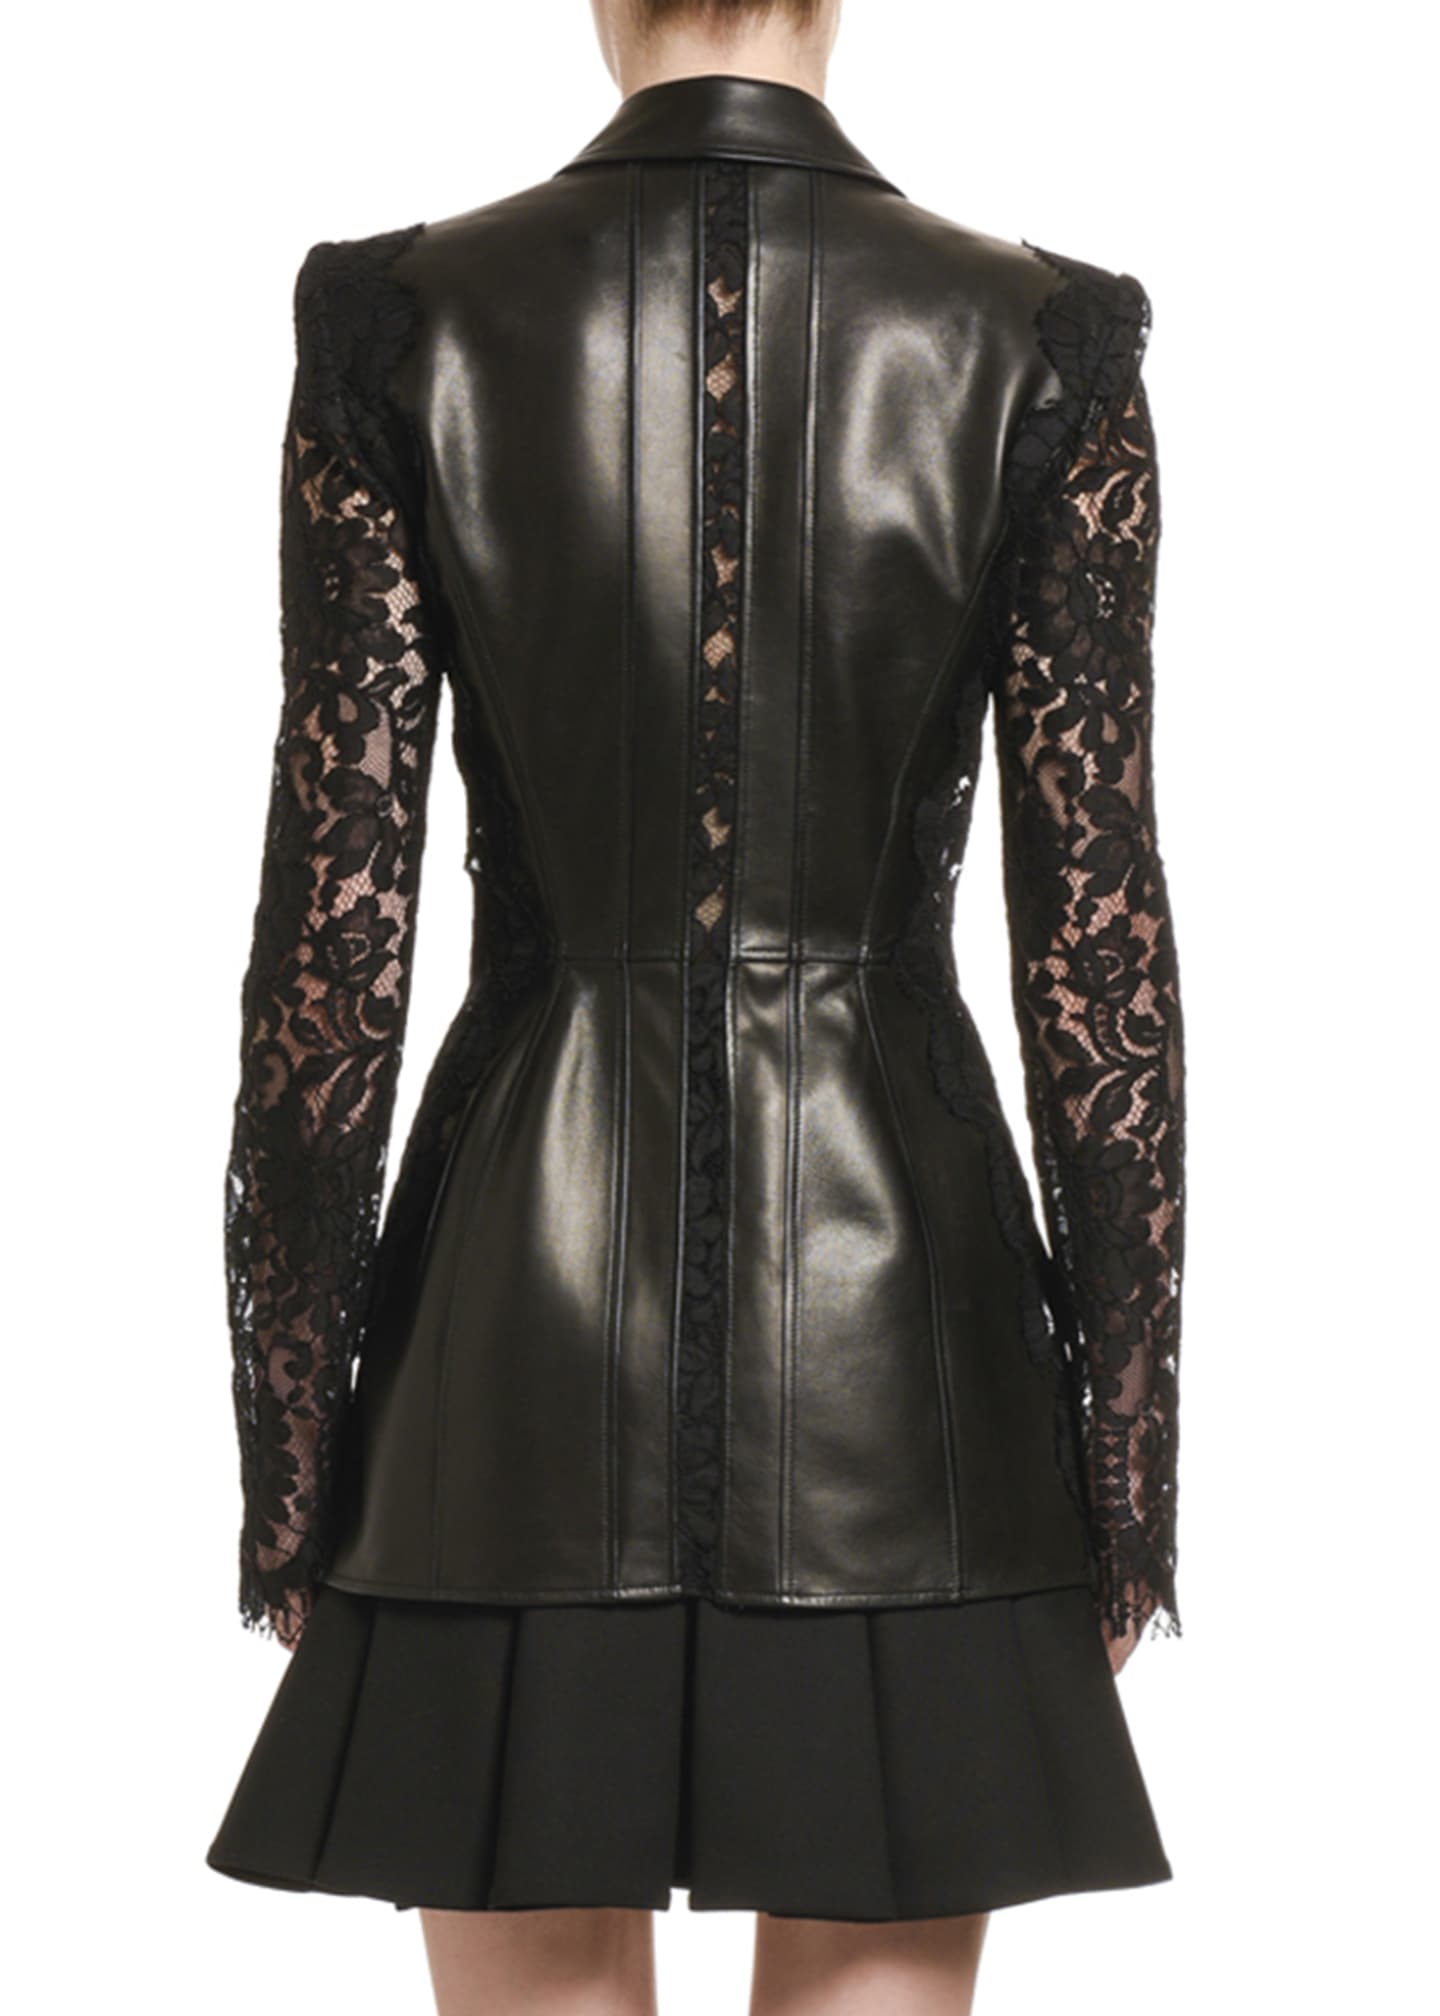 Alexander McQueen Leather Blazer with Lace Sleeves - Bergdorf Goodman